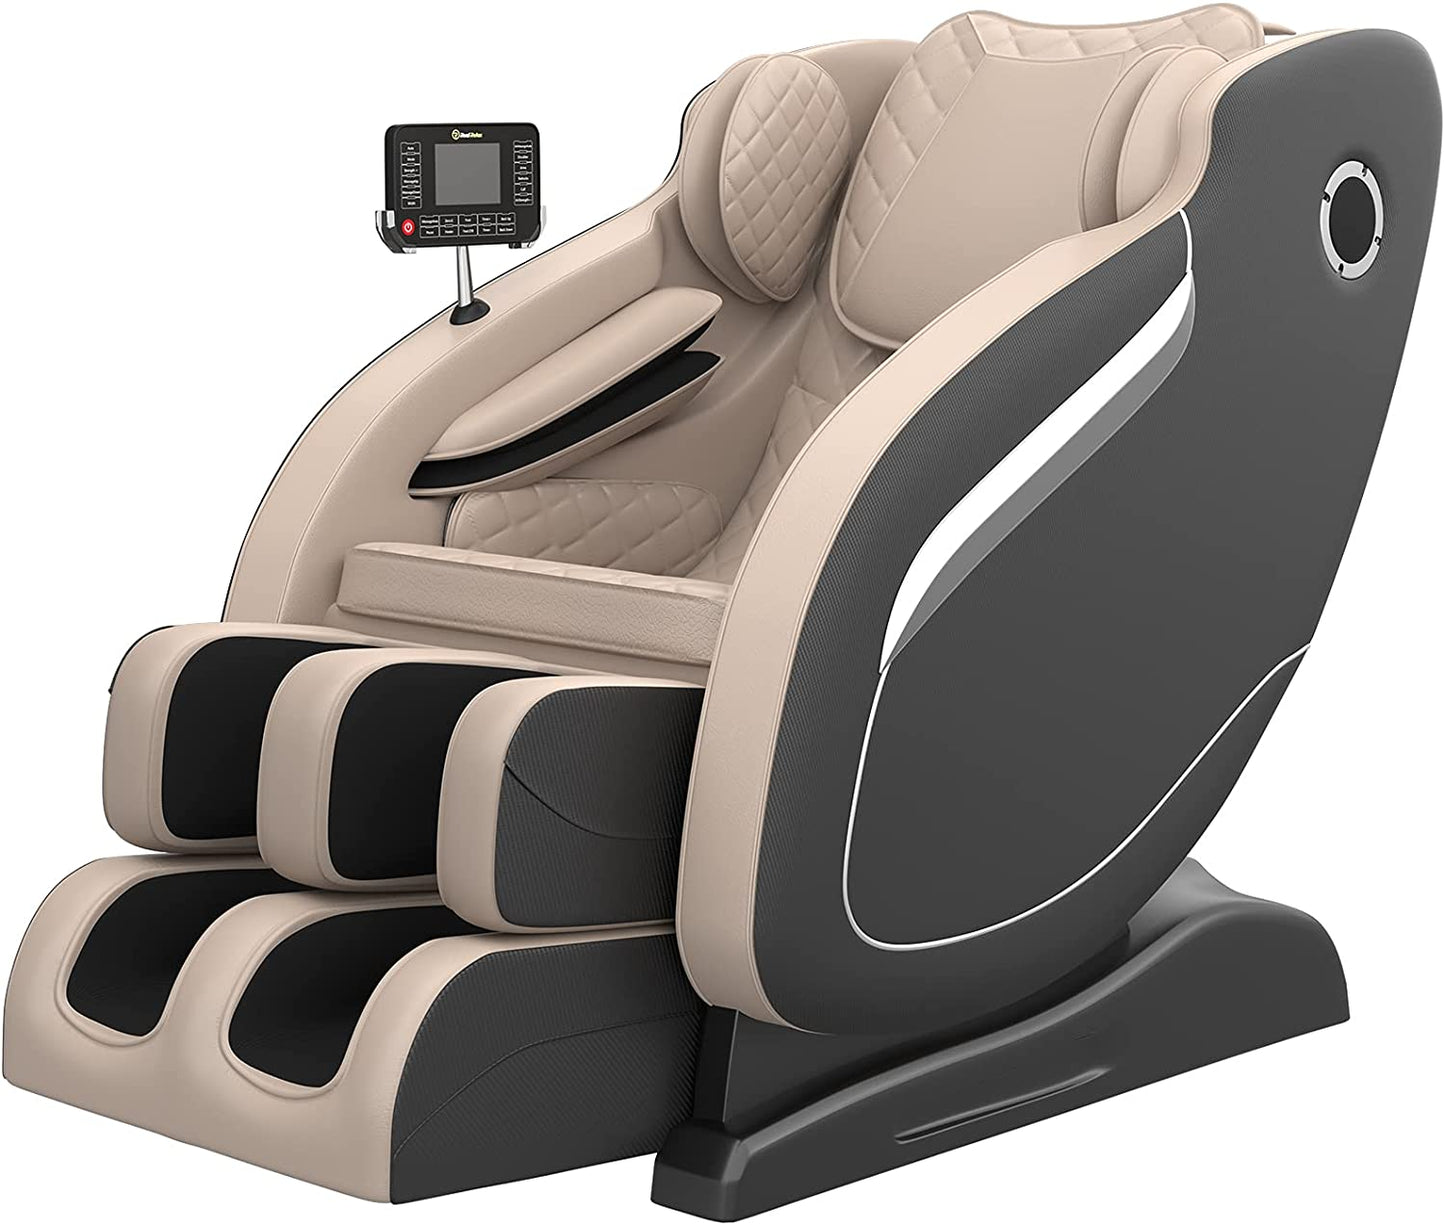 Real Relax Massage Chair Real Relax® Favor-MM650 Massage Chair Beige